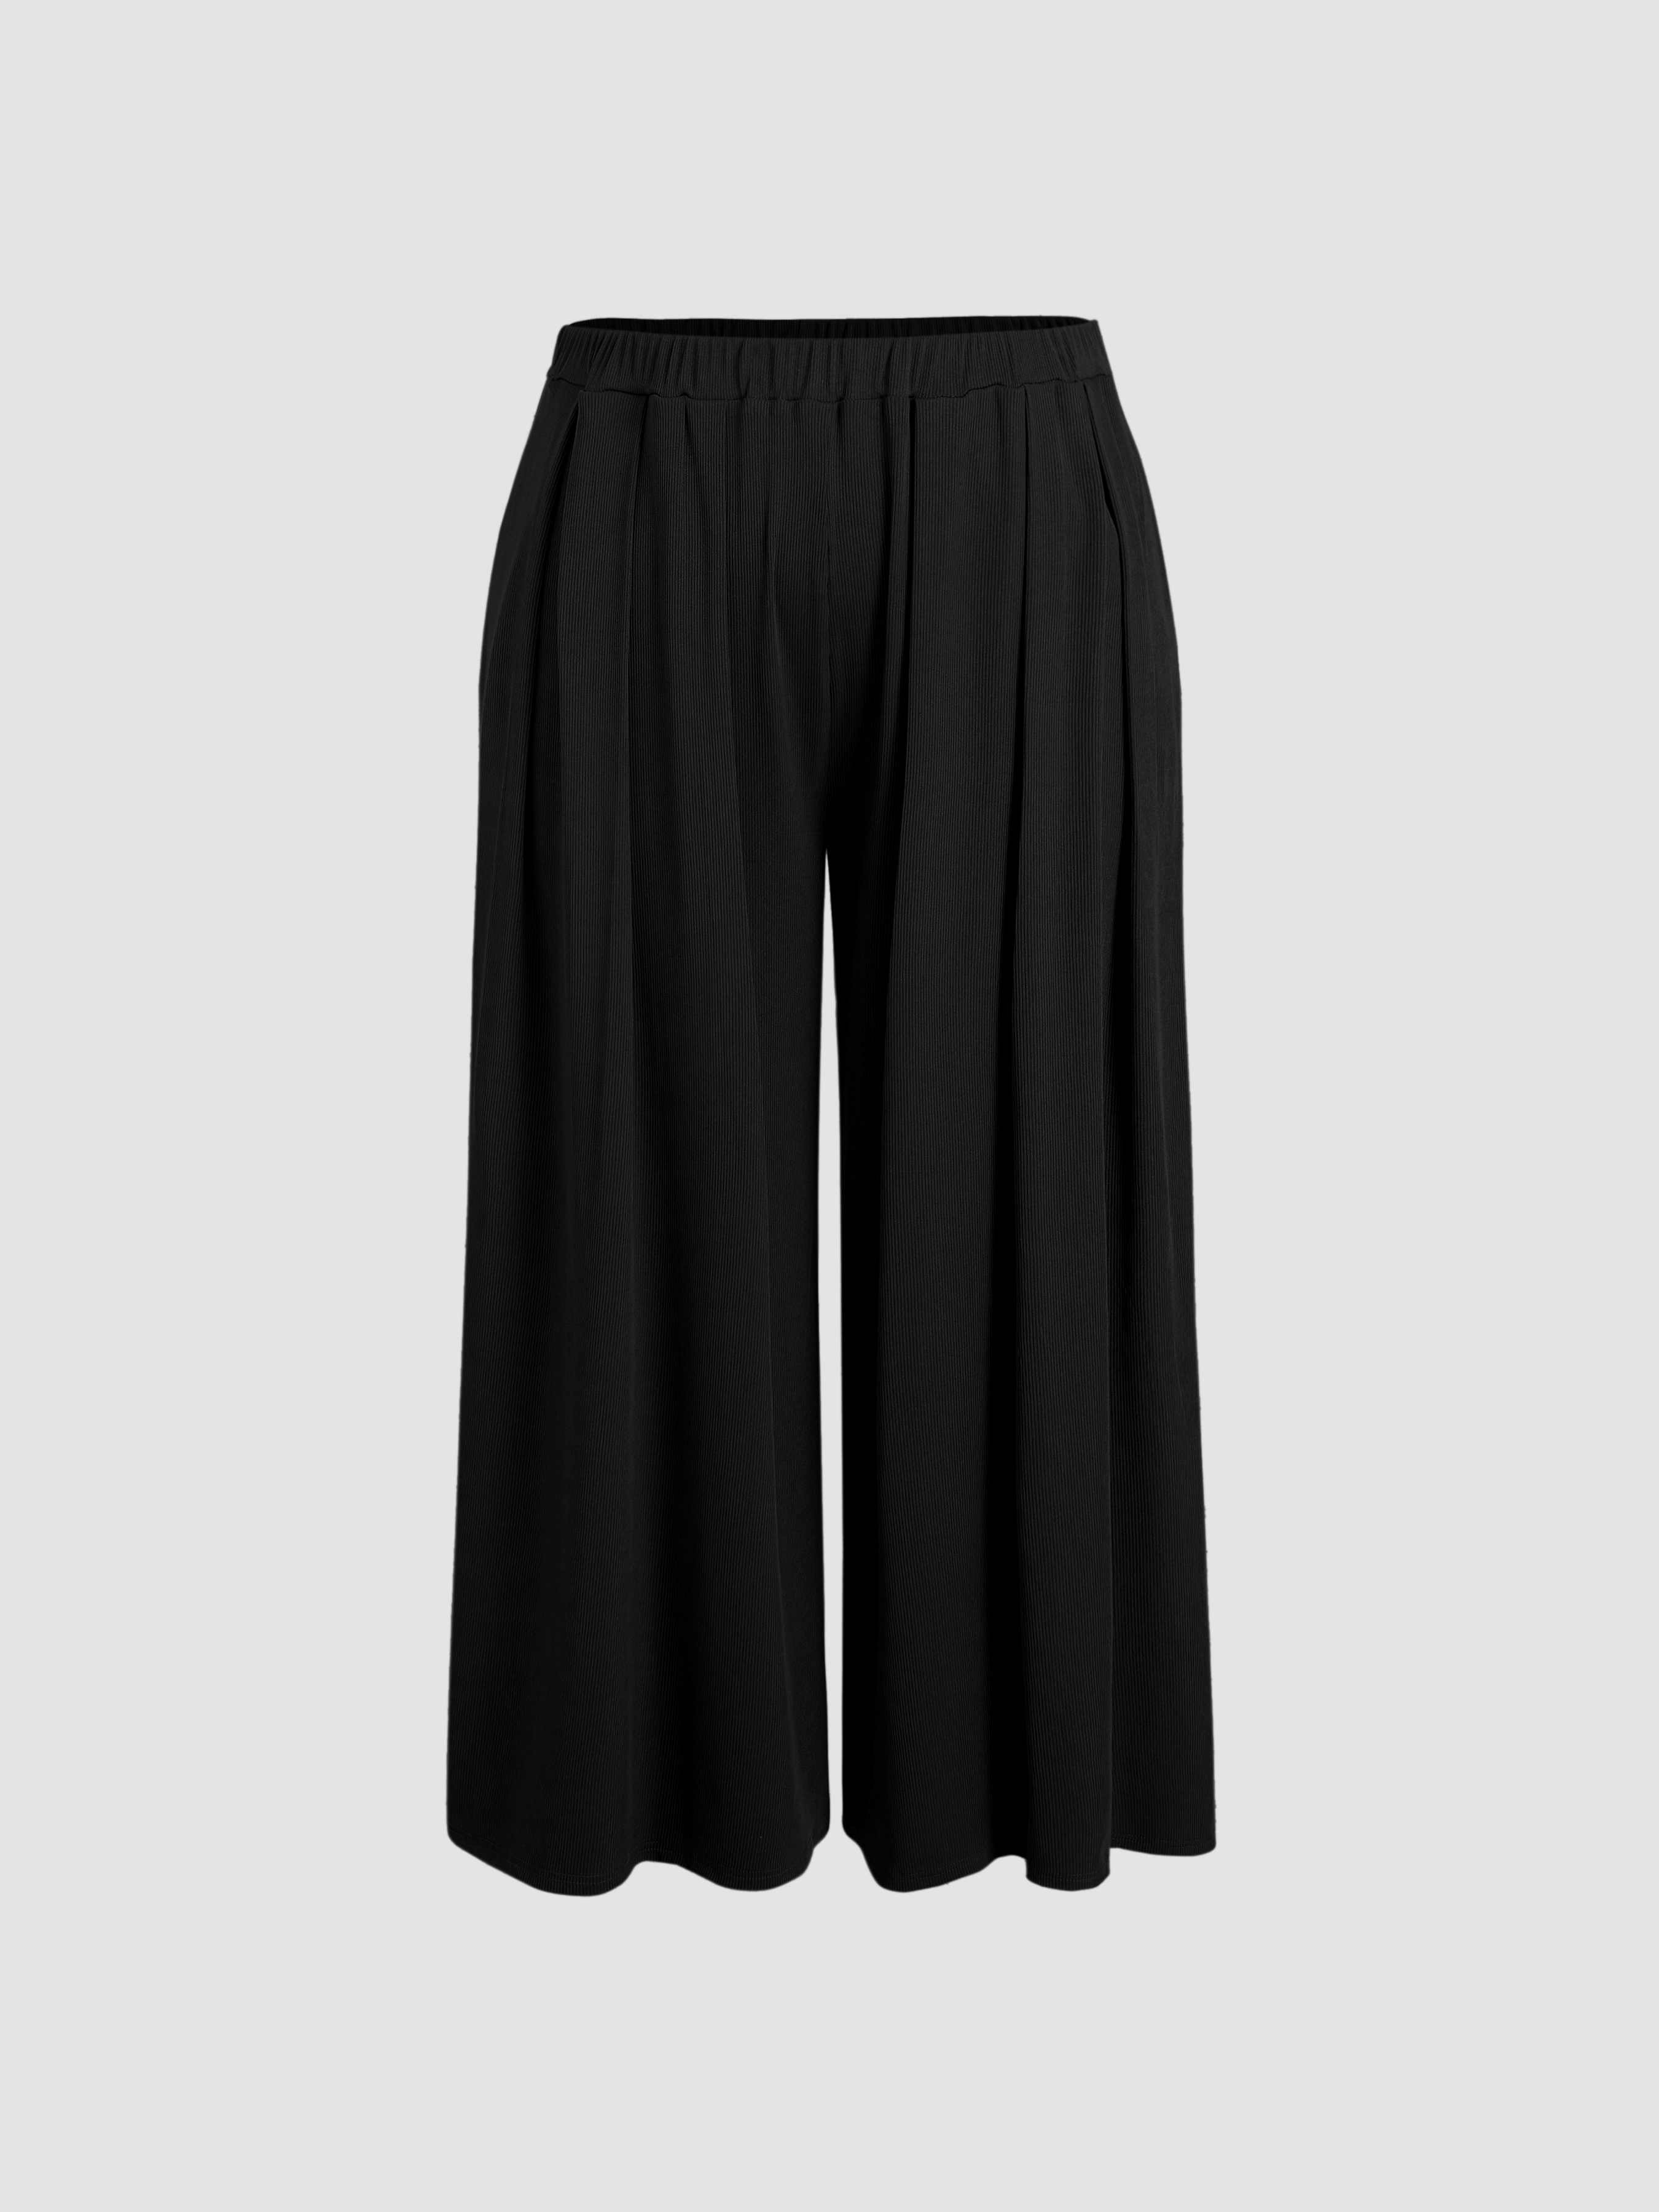 KIHOUT Clearance Women's Plus Size Pants CasualSolid Color Elastic Loose  Pants Straight Wide Leg Trousers With Pocket 